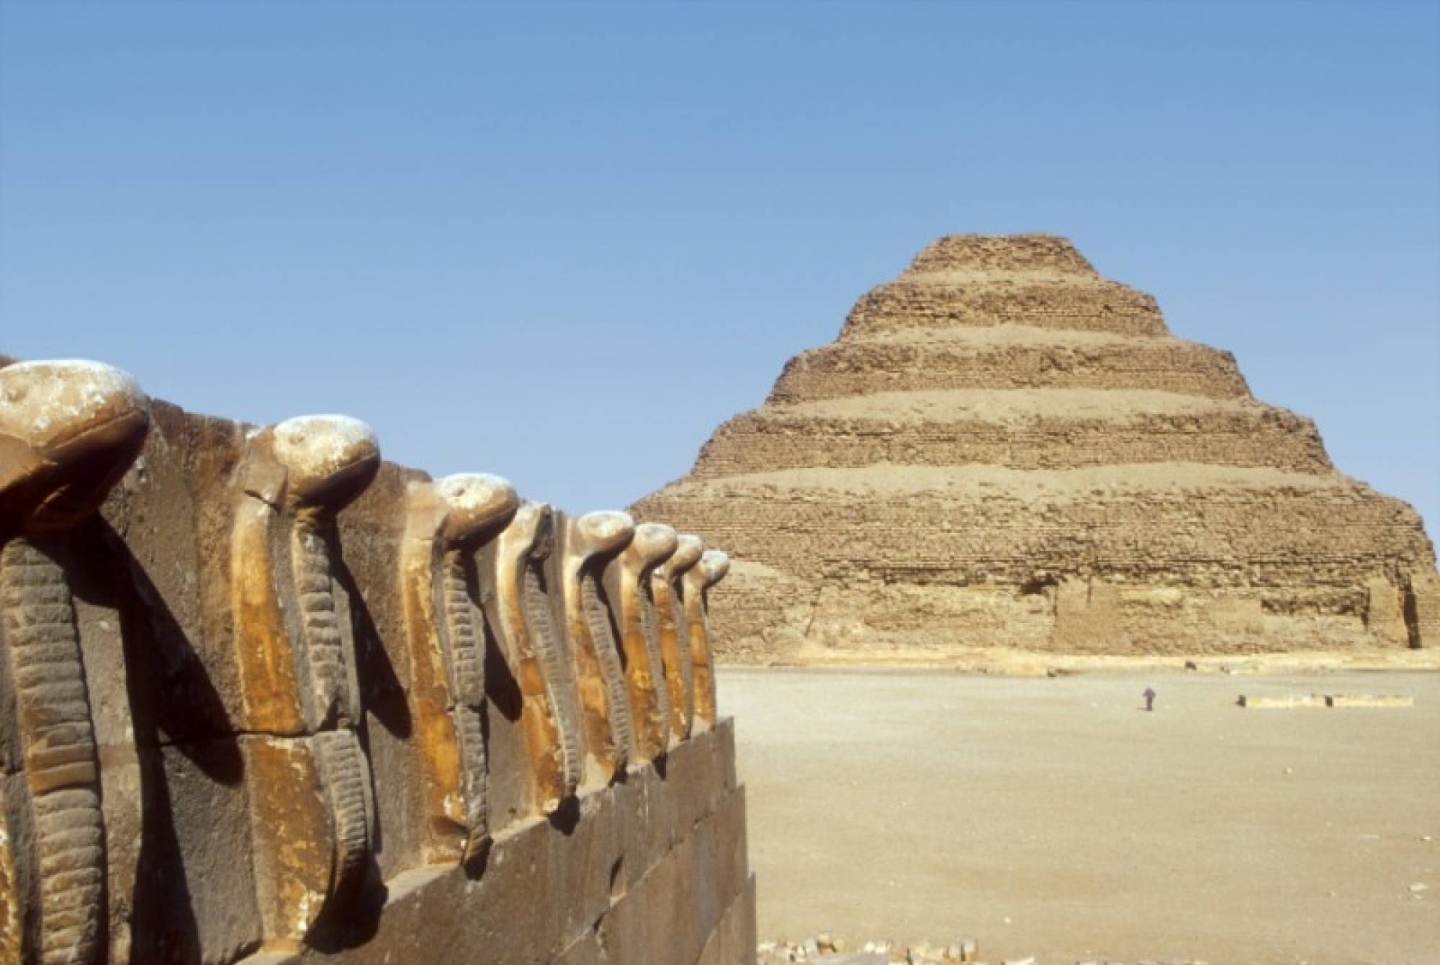 Full Day Pyramids Tours From El Sokhna Port